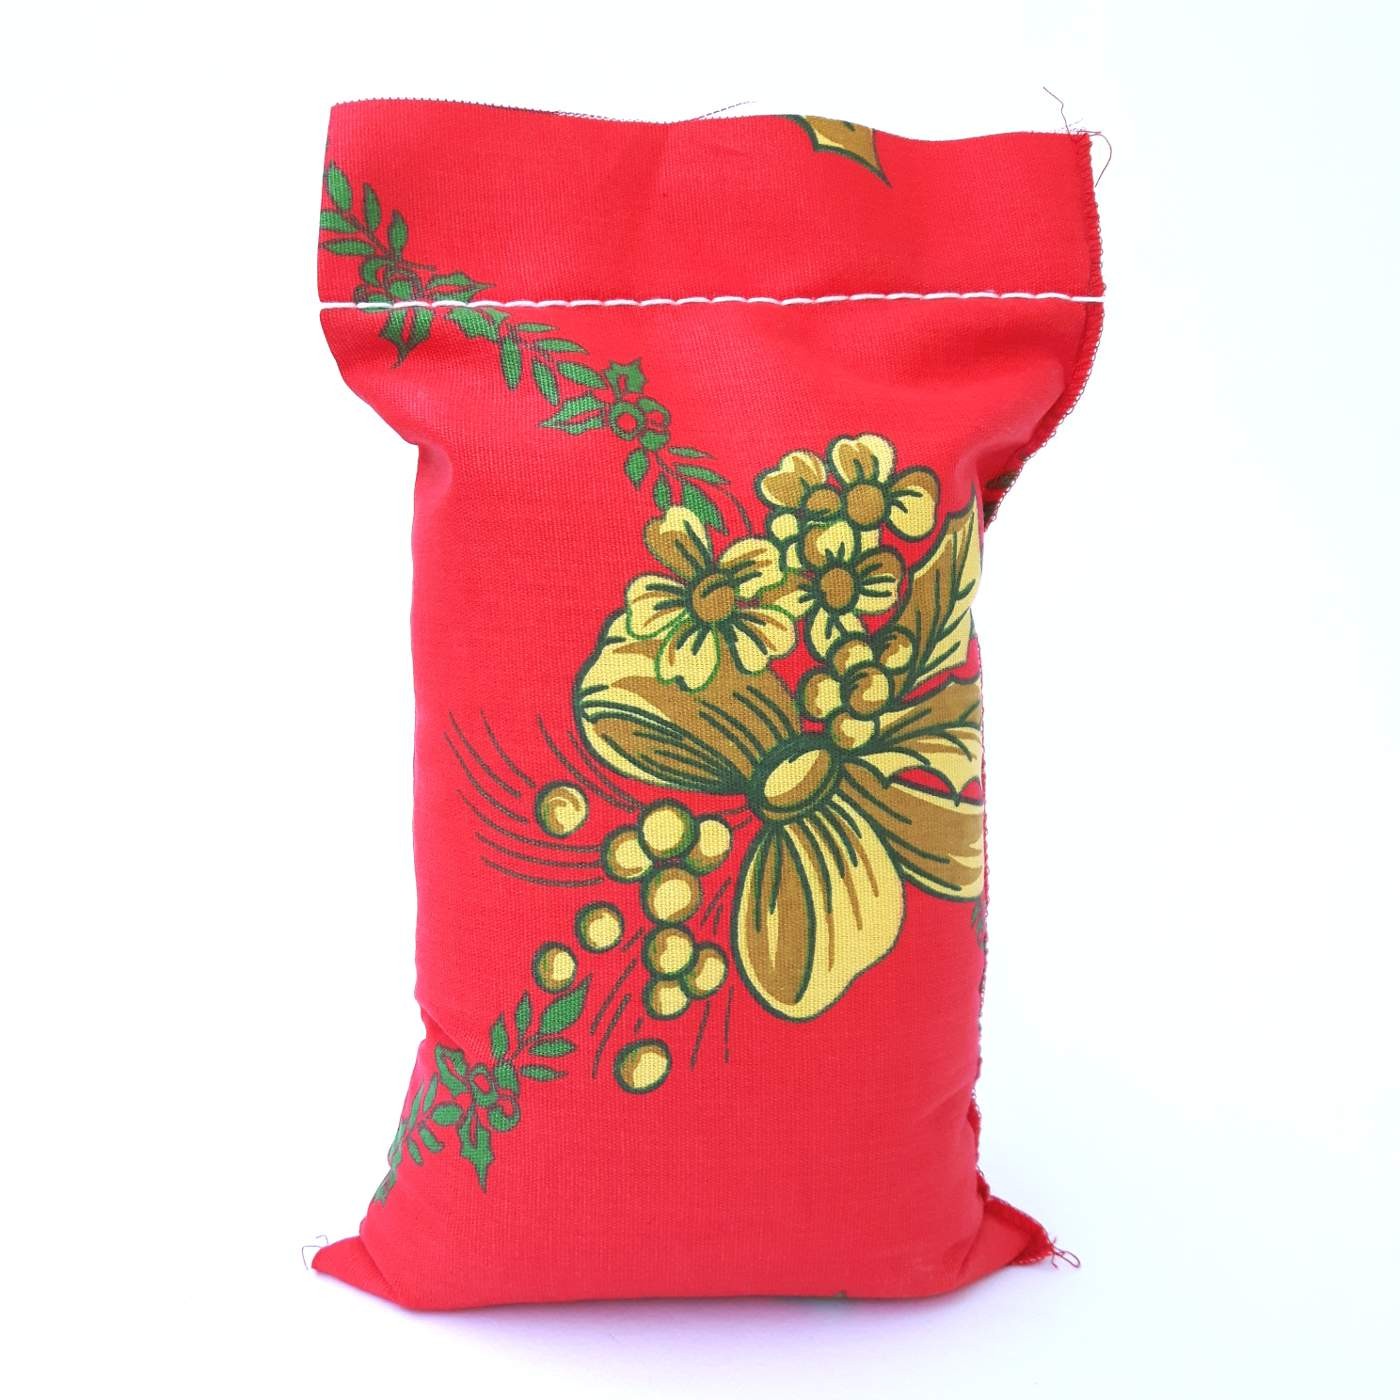 Roma crespiriso rice 1kg Christmas package in natural cotton